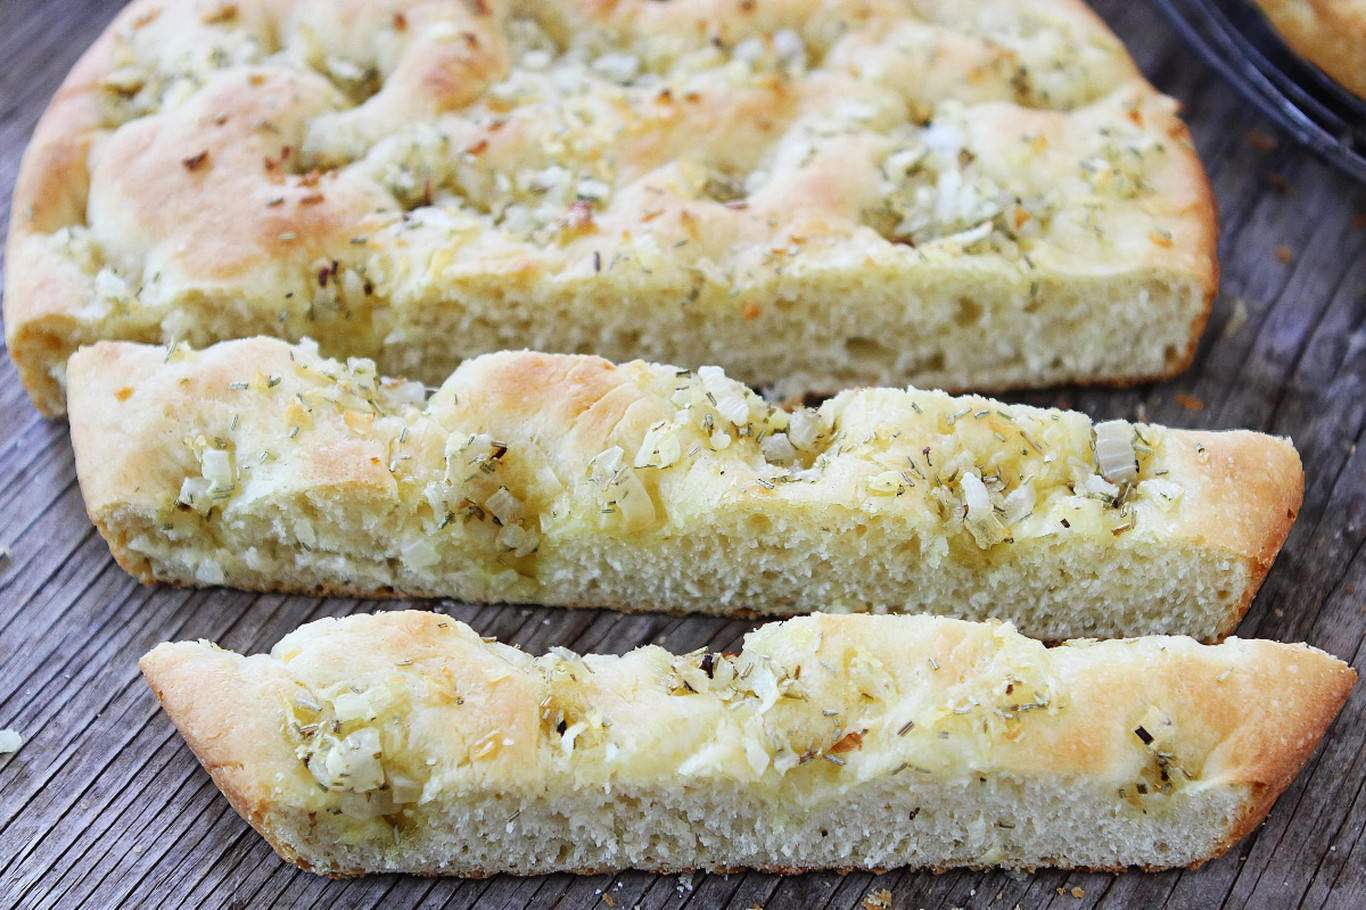 How To Make a 5-Ingredient Mini Loaf Pan Focaccia